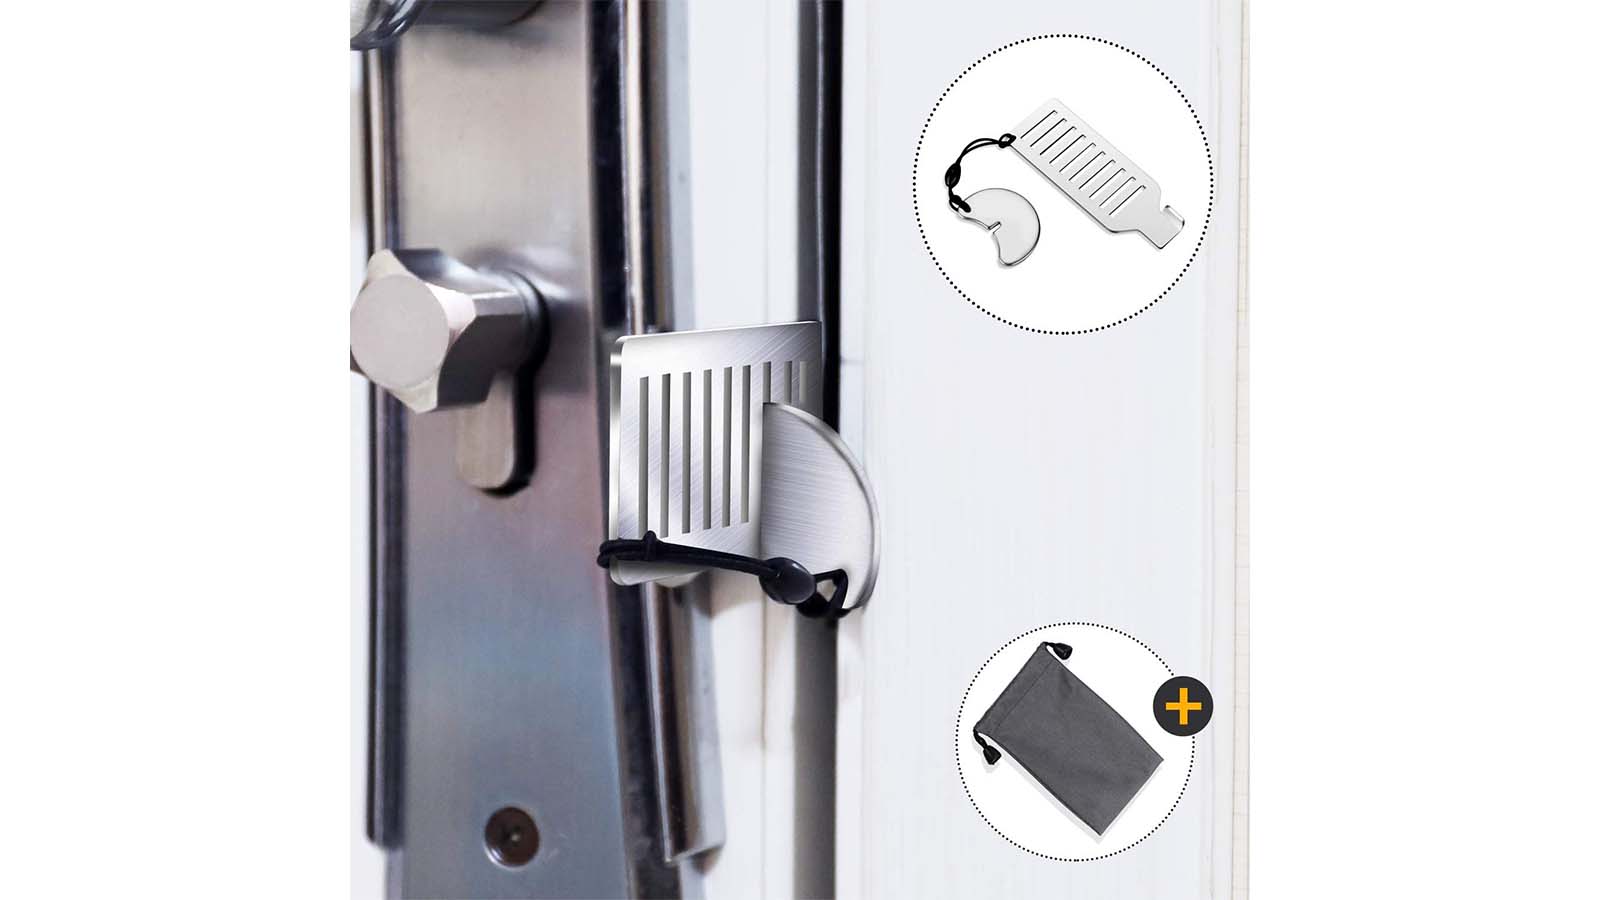 What travelers need to know about portable door locks - The Washington Post